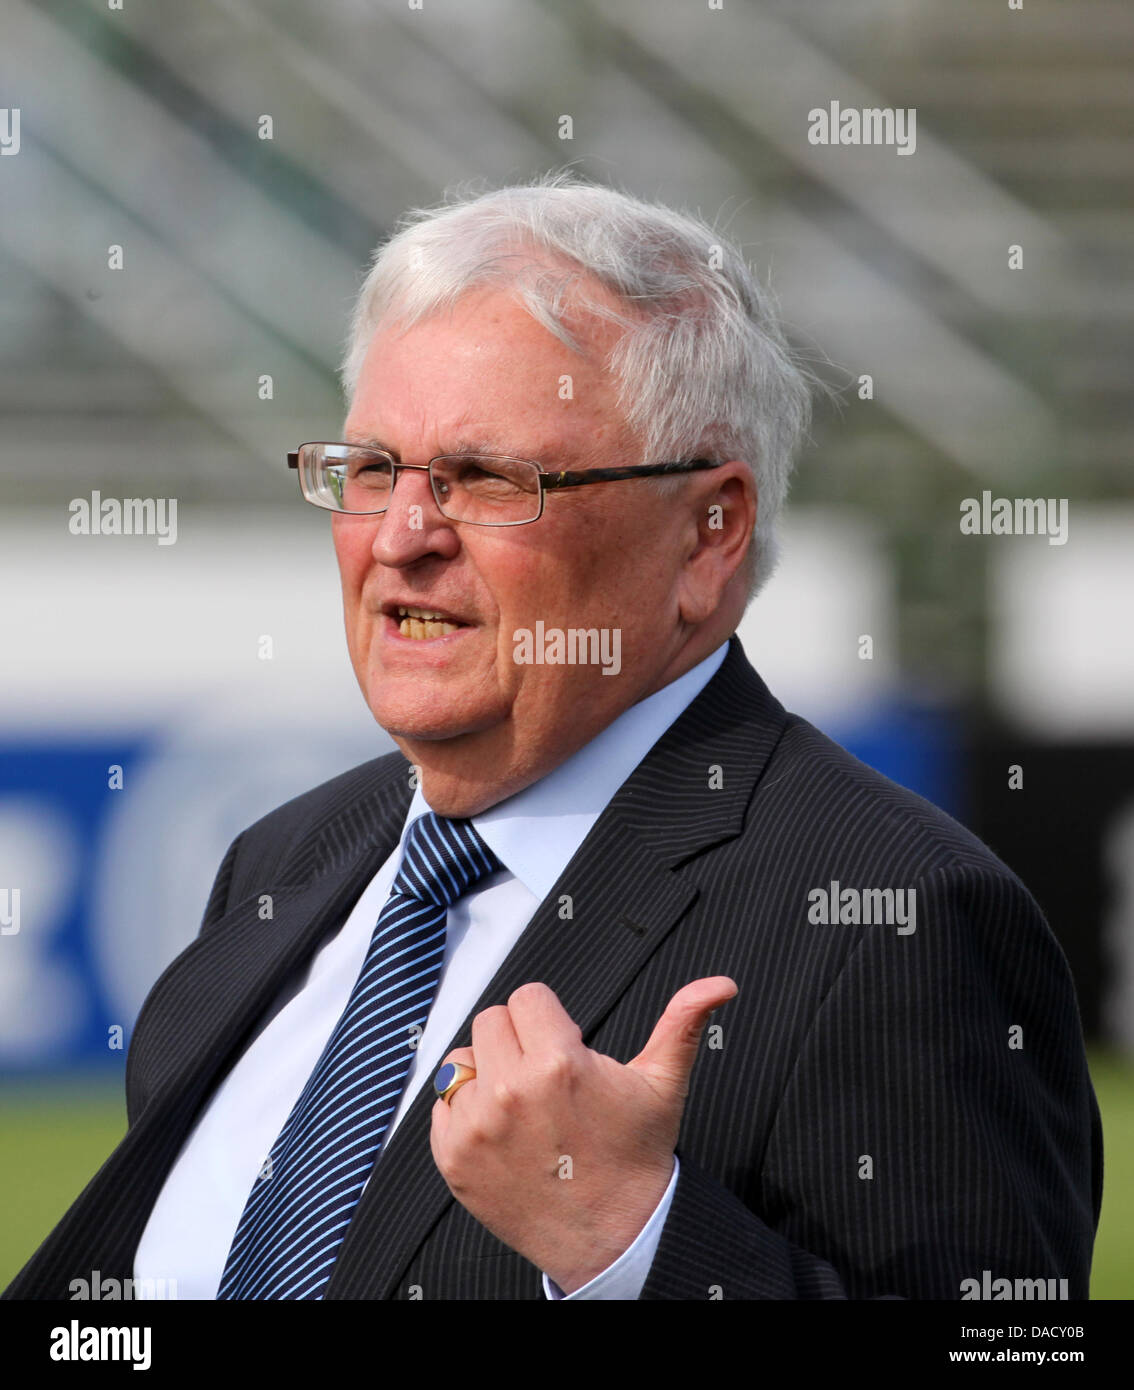 (FILE) An archive photo dated 11 April 2011 shows Theo Zwanziger, president of the German Football Association (DFB), during training camp of the German women's national soccer team in Bitburg, Germany. DFB President Zwanziger told the presidents of regional and state soccer associations in Frankfurt Main on 22 December 2011 that he will hand over his office to his predecessor Nier Stock Photo